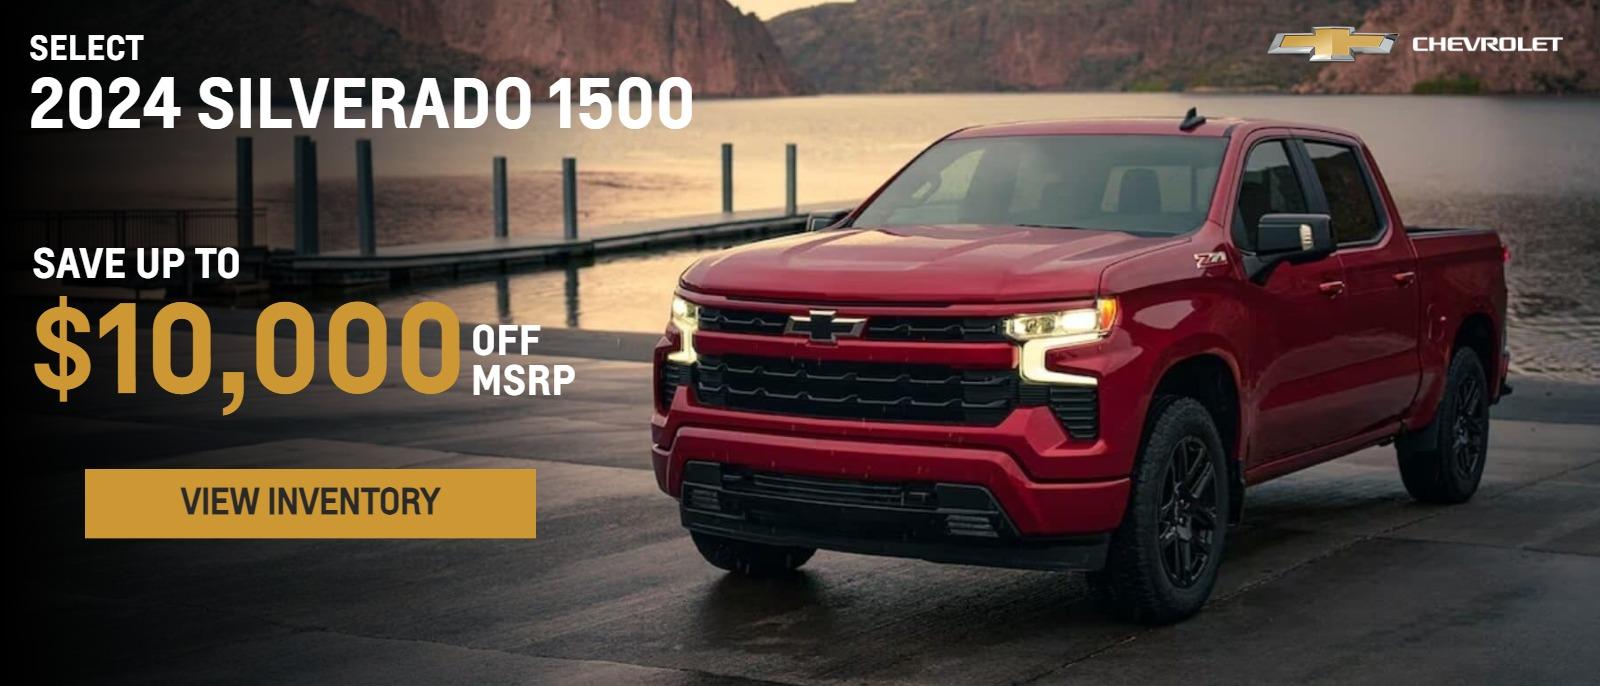 Up to $10,000 off MSRP on select 2024 Silverado 1500